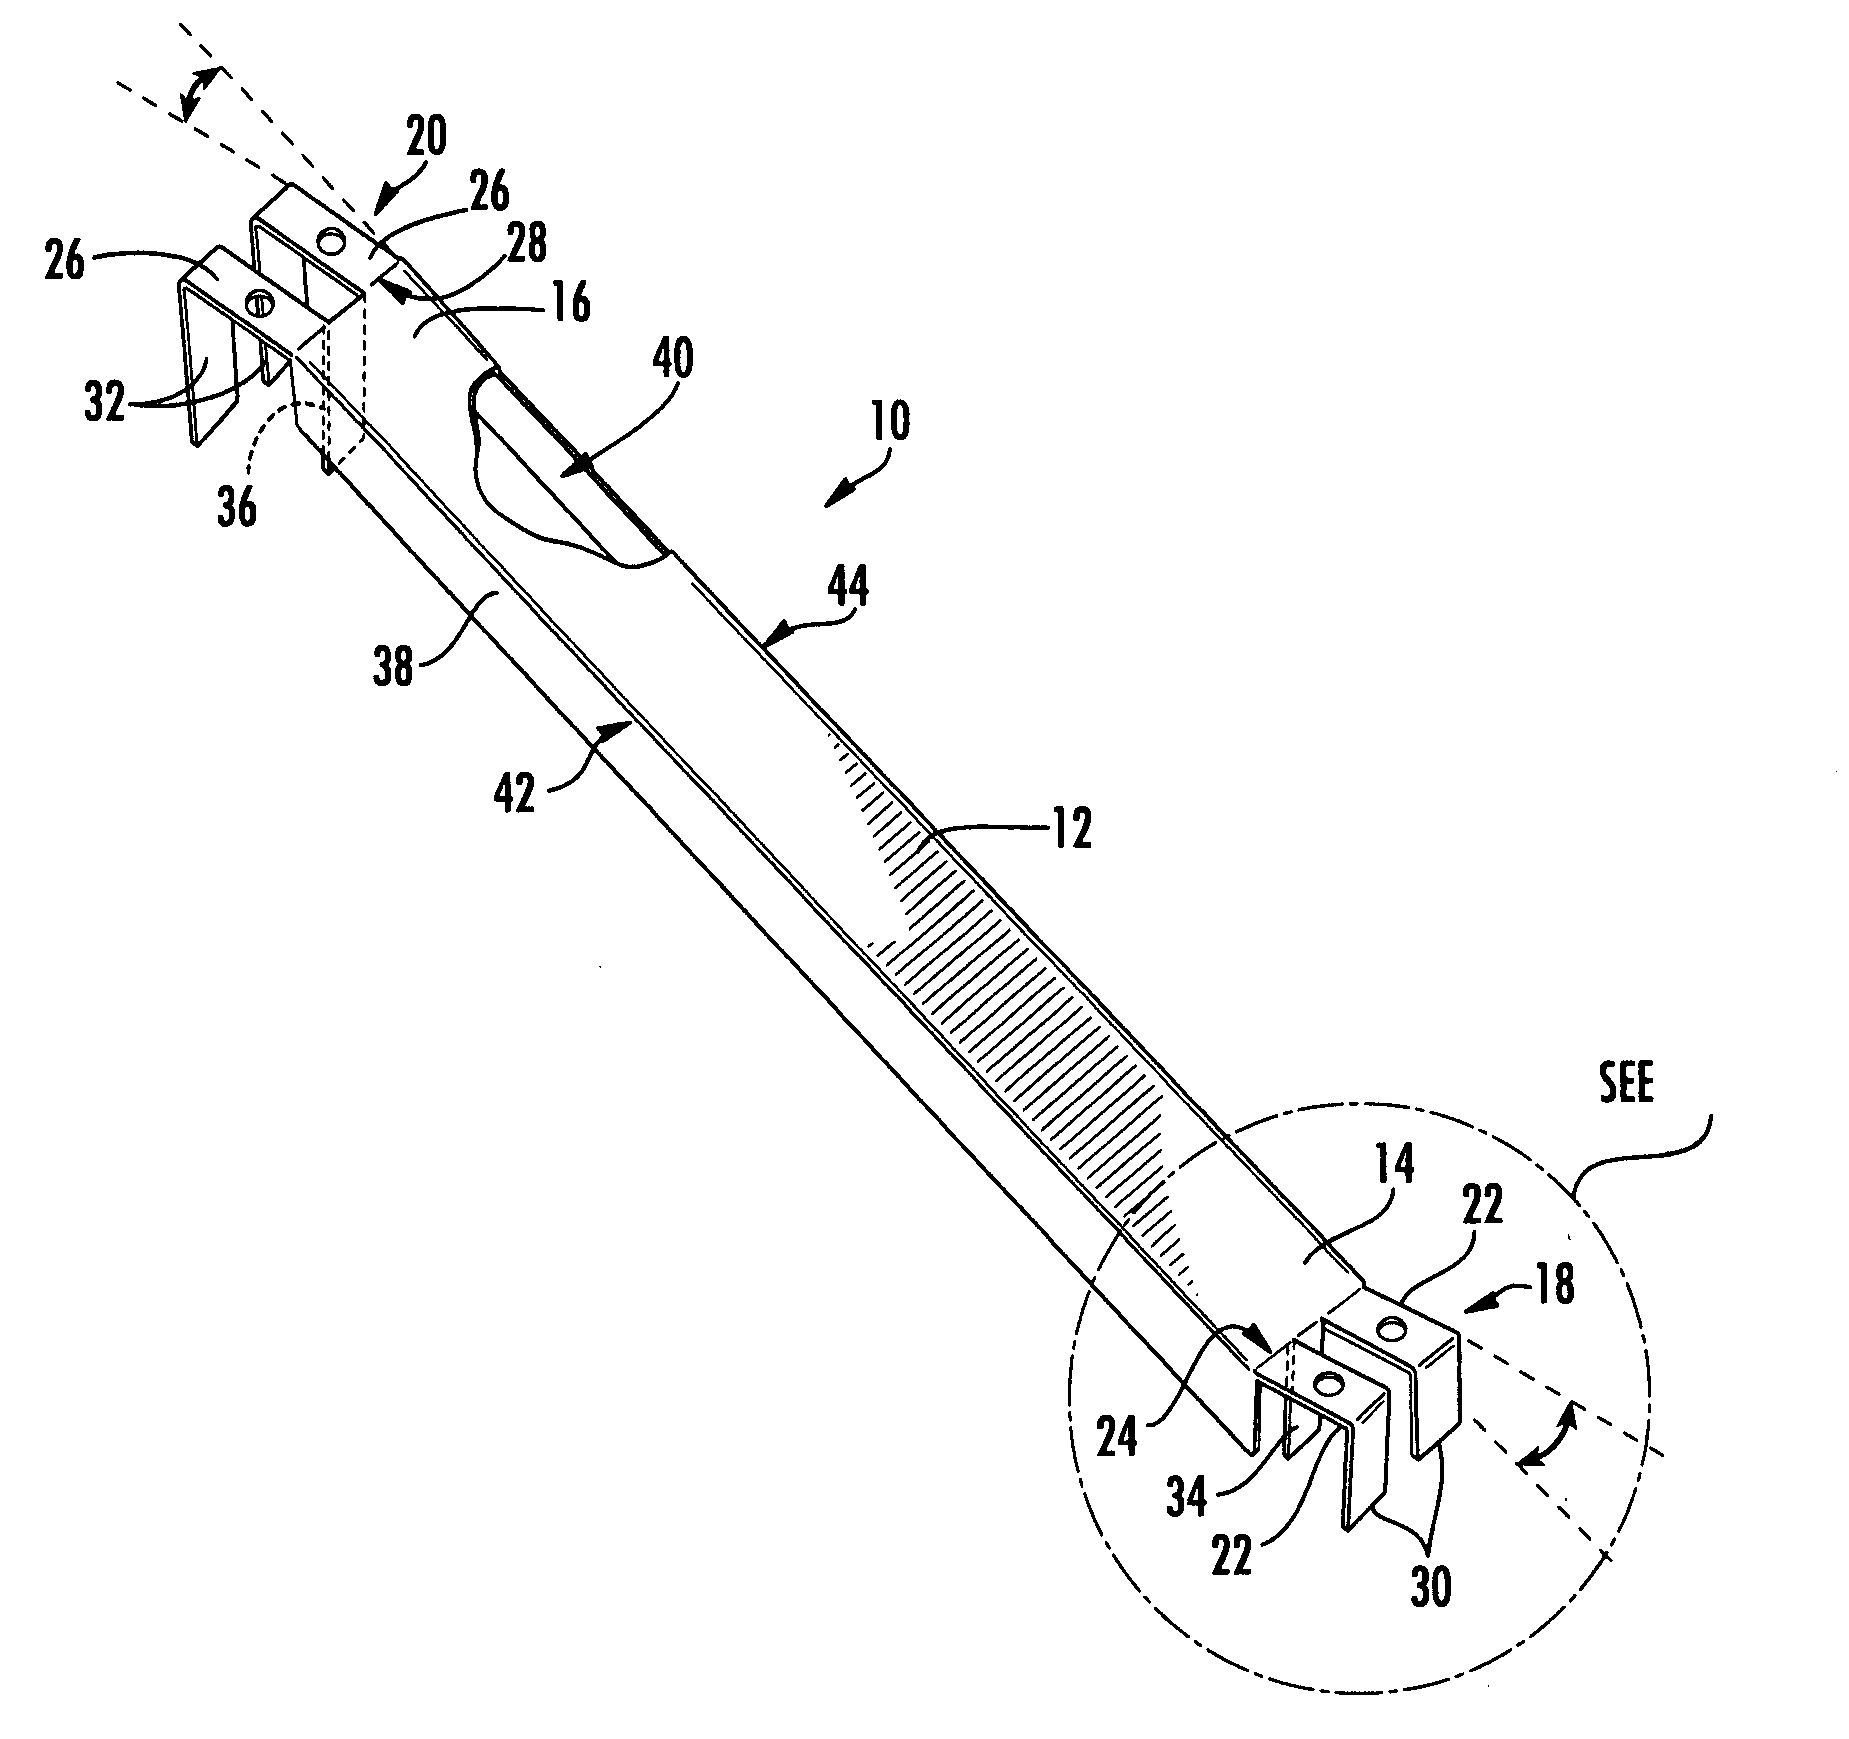 Bracing and spacing apparatus for hip trusses